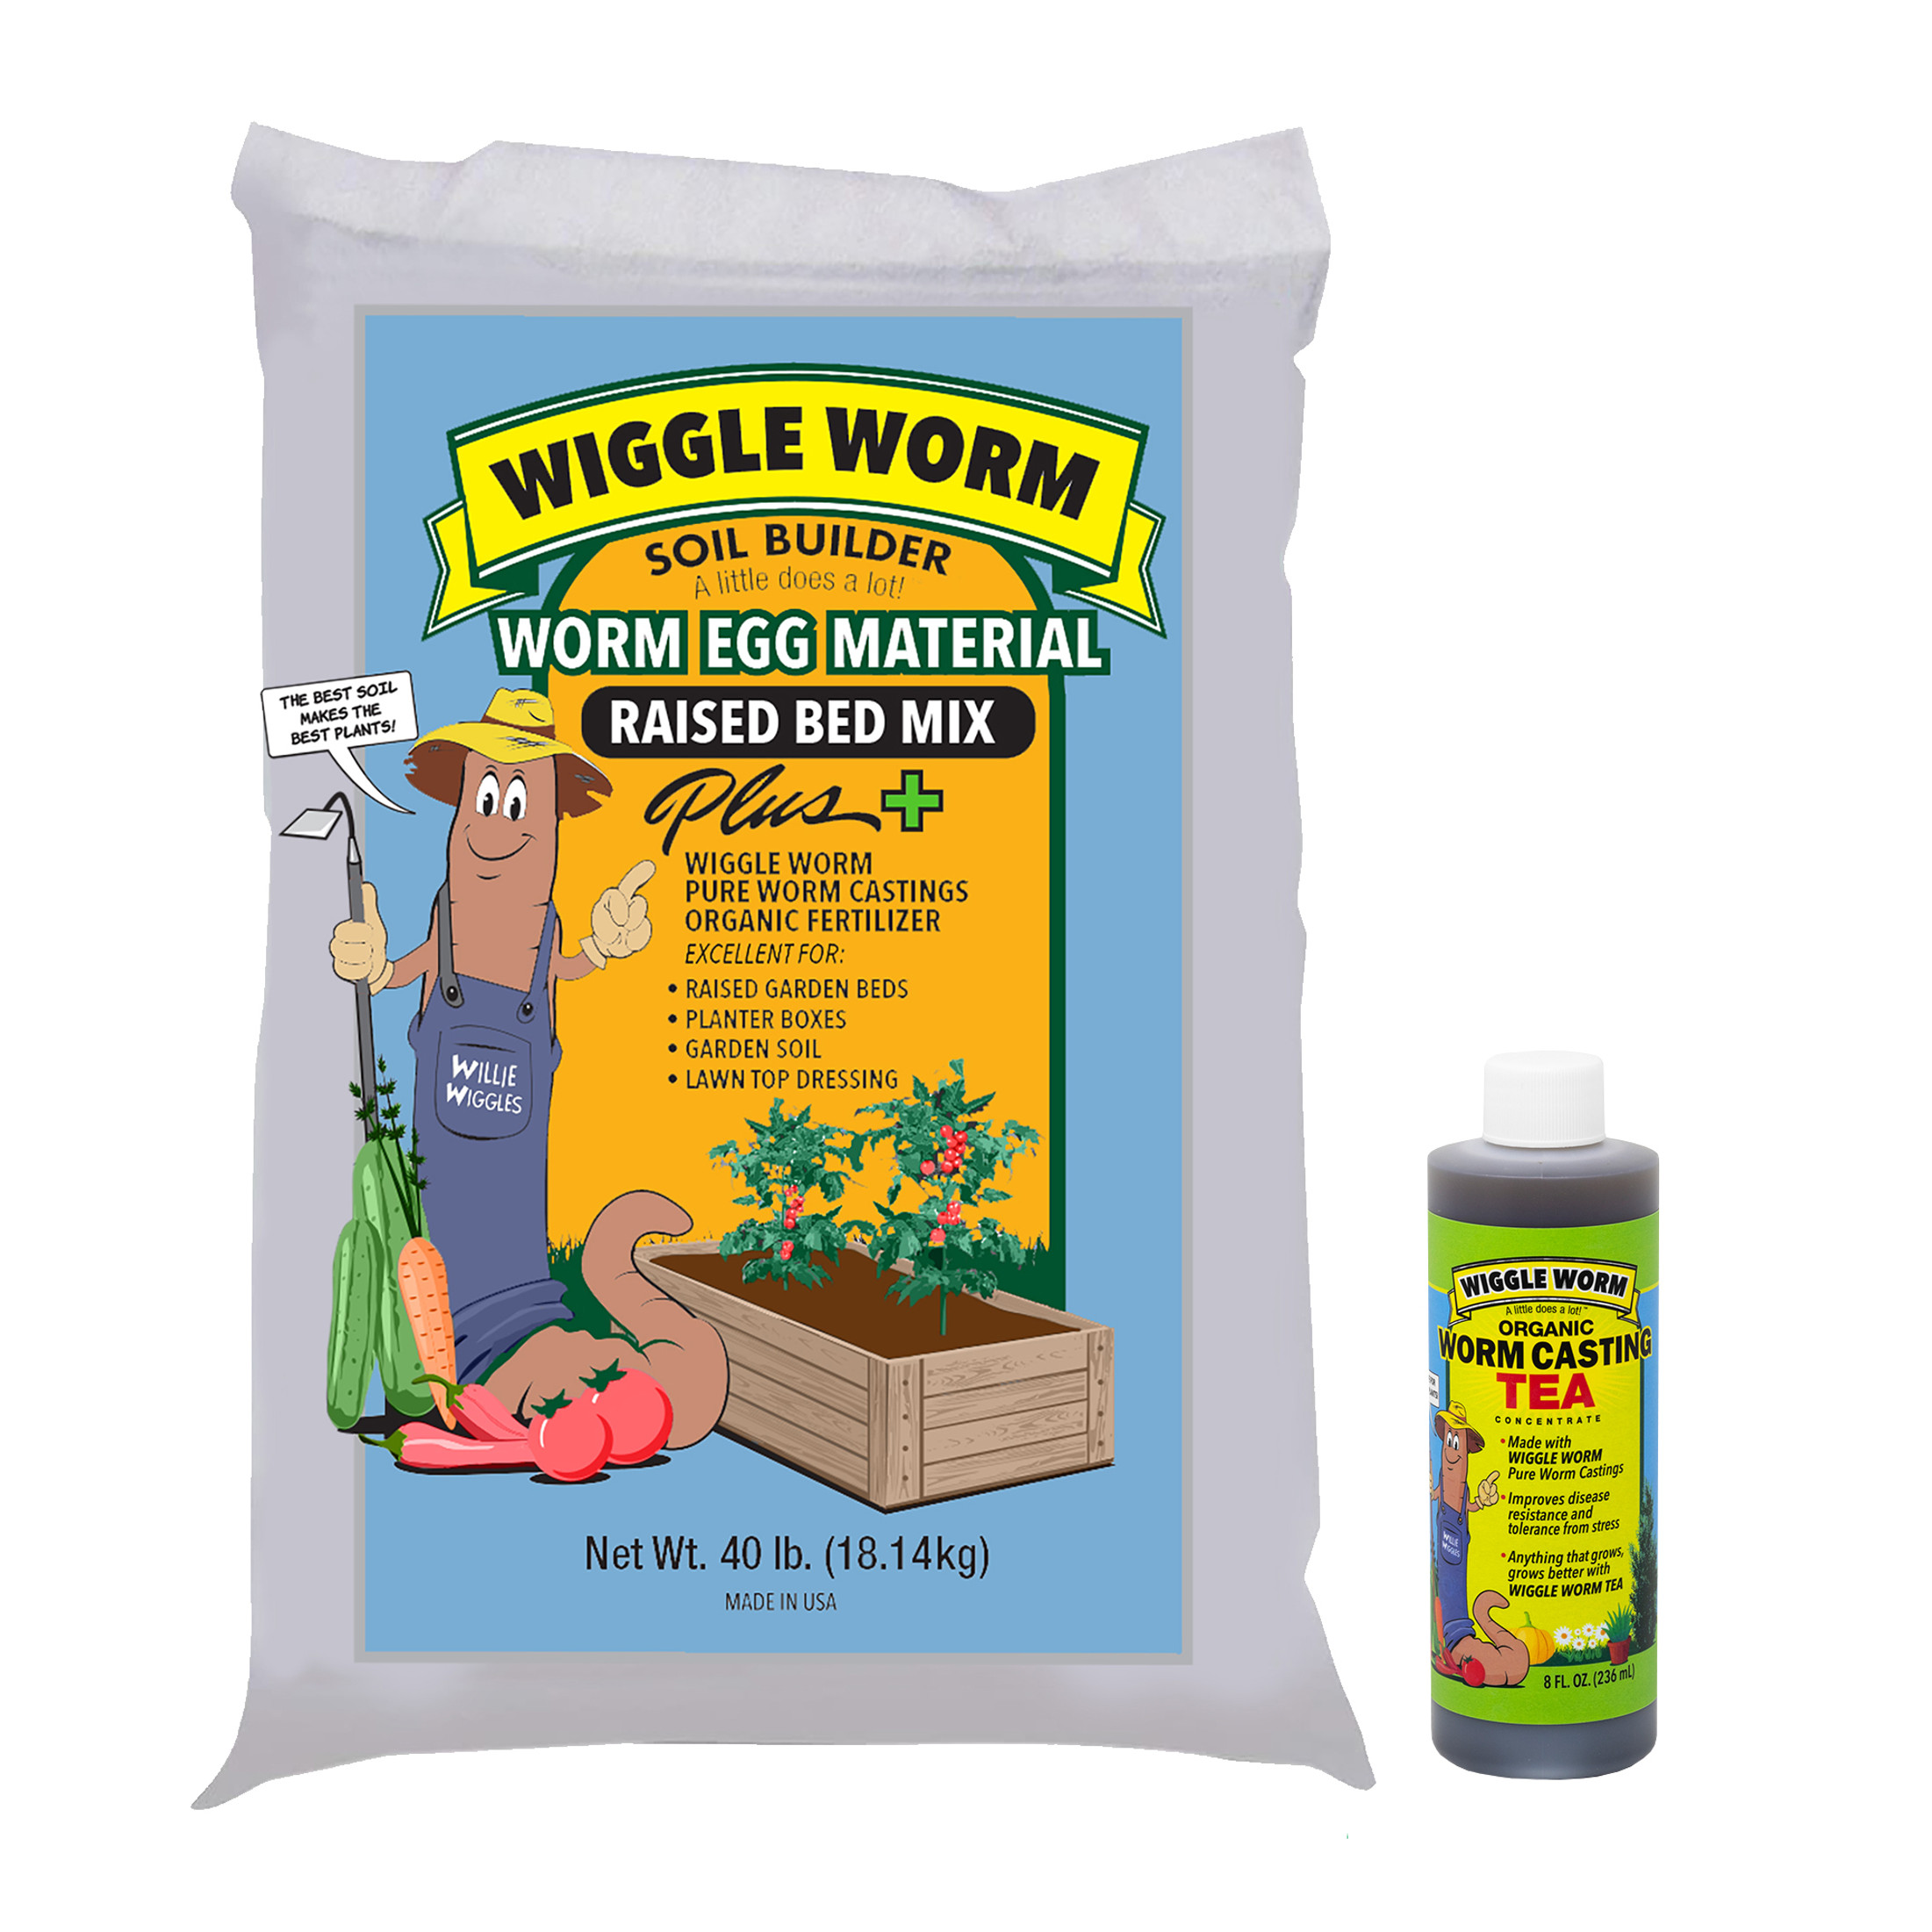 WIGGLE WORM Soil Builder Worm Egg Material Raised Bed Mix For Gardening, 40 Pound Bag, and WIGGLE WORM Castings Tea, 8 Ounce